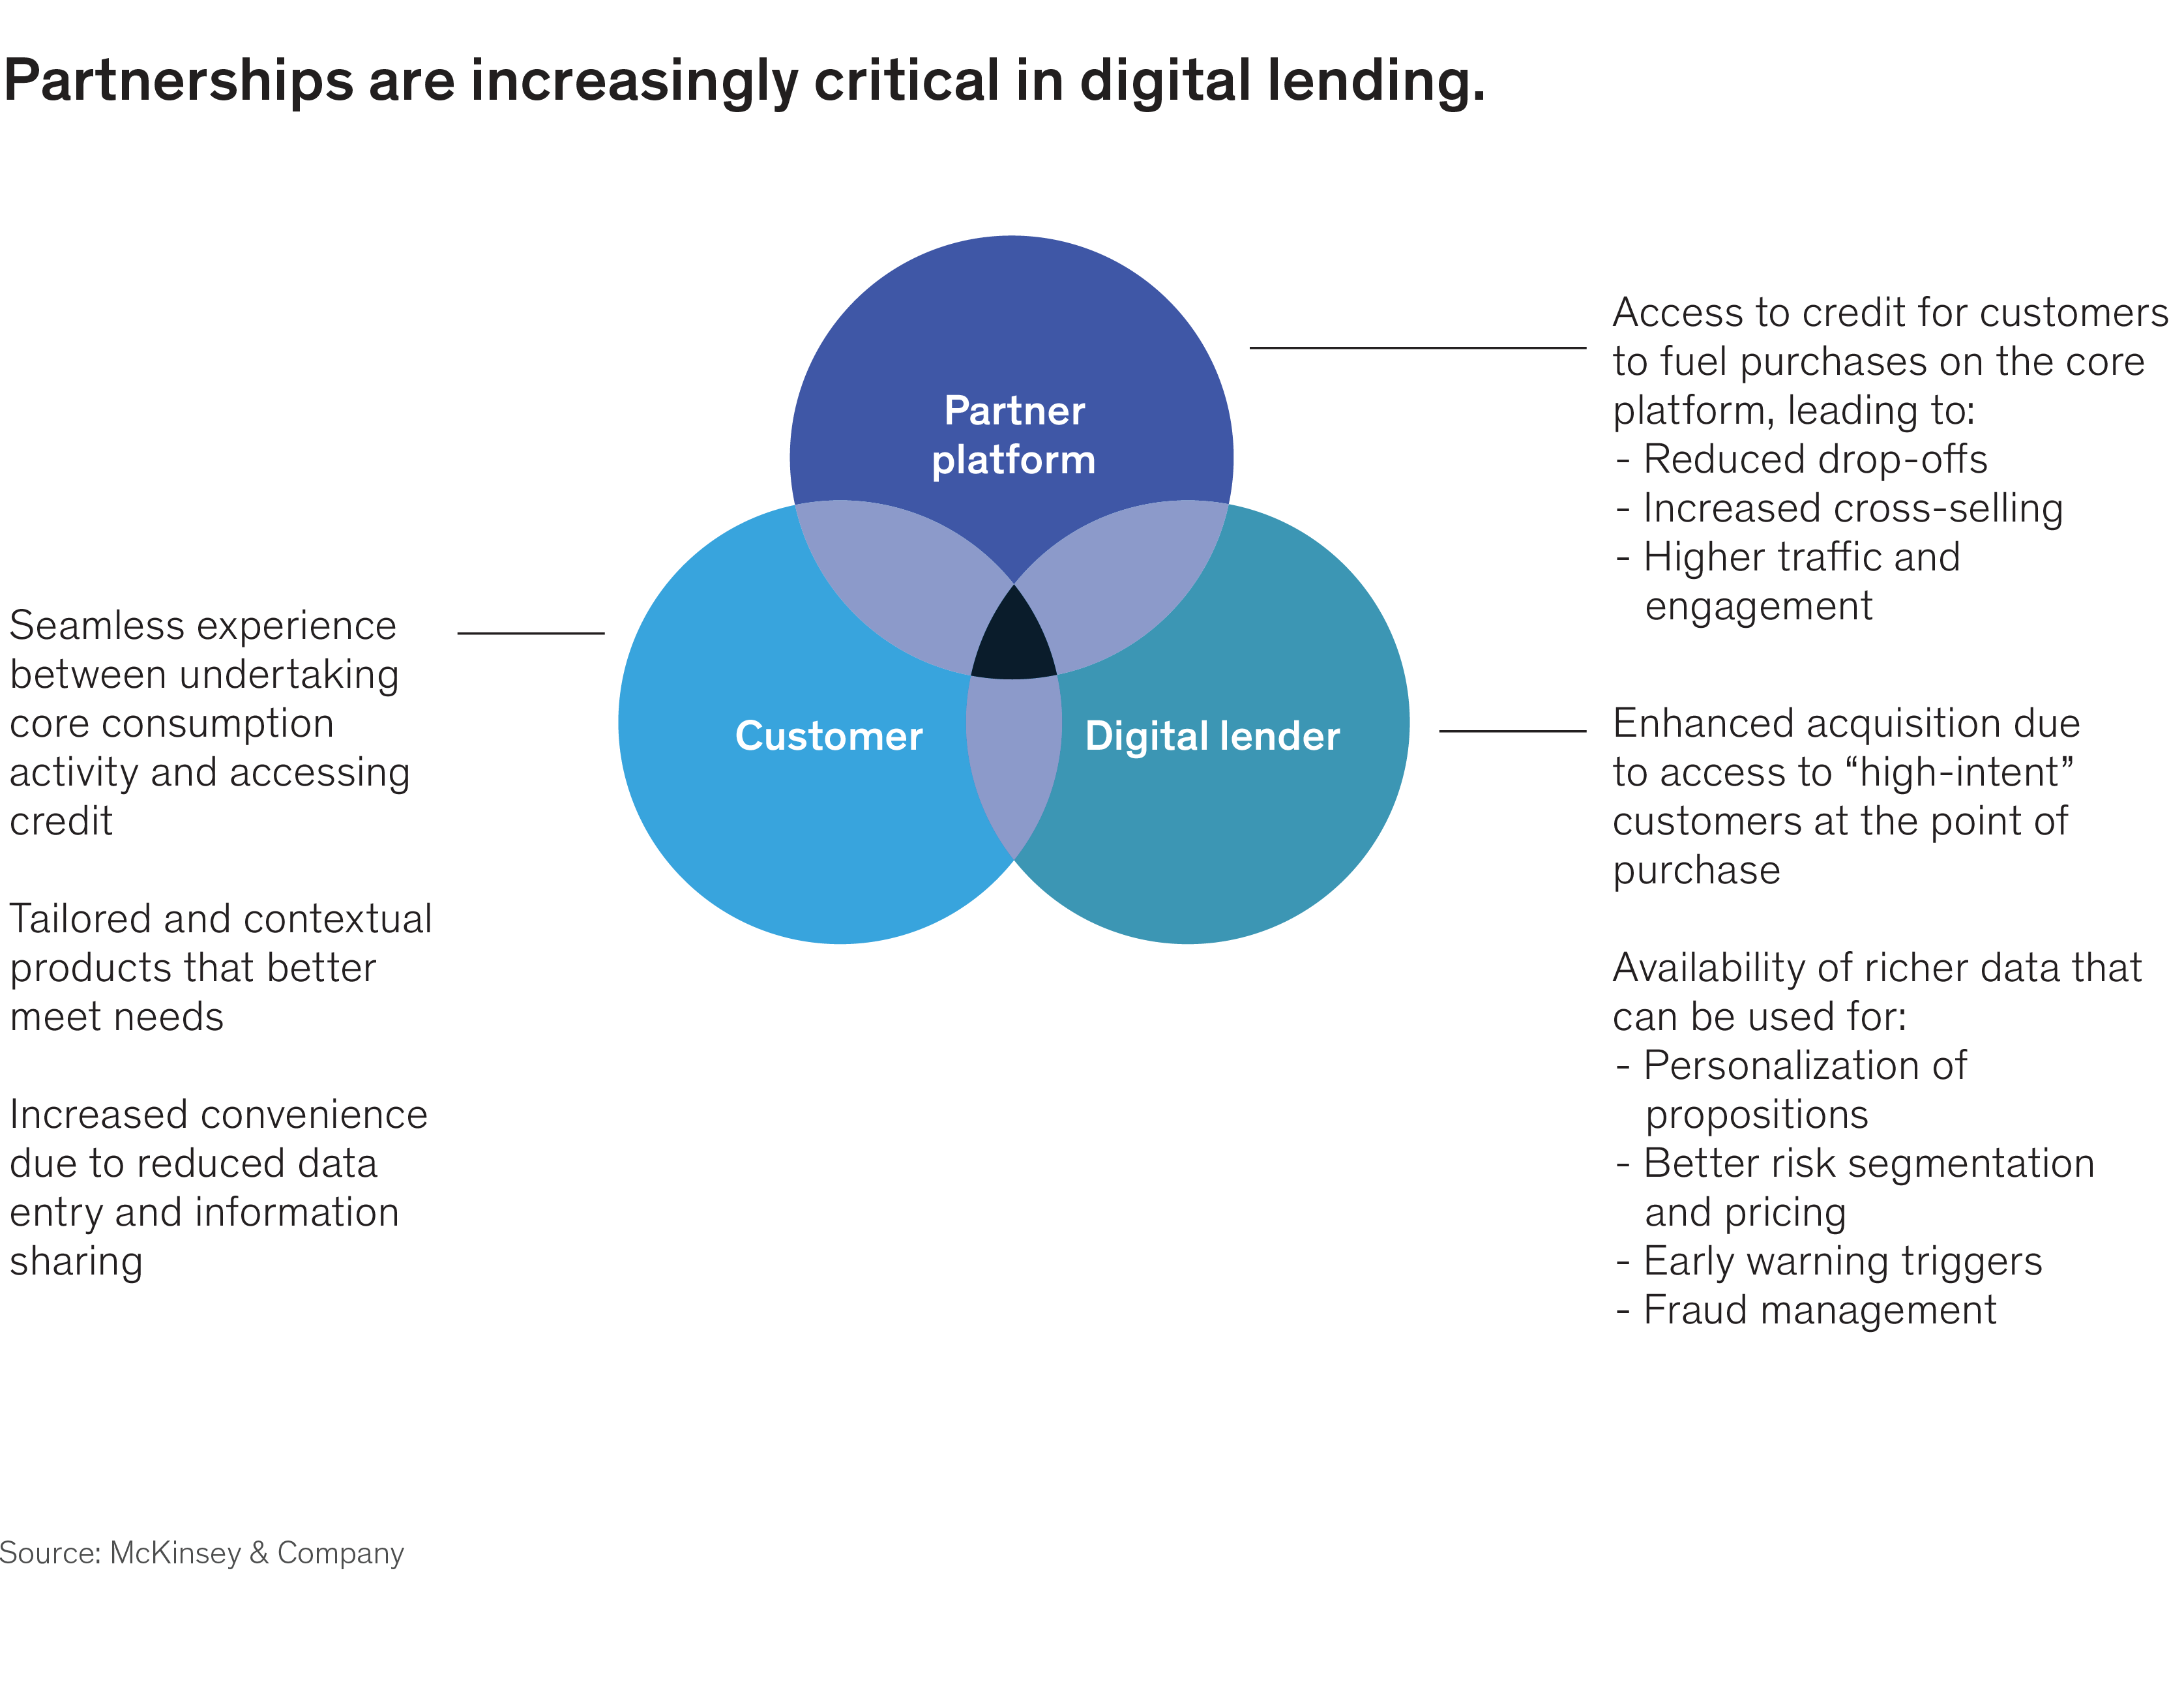 Lending Circles as a Means of Improving Credit - Business Review